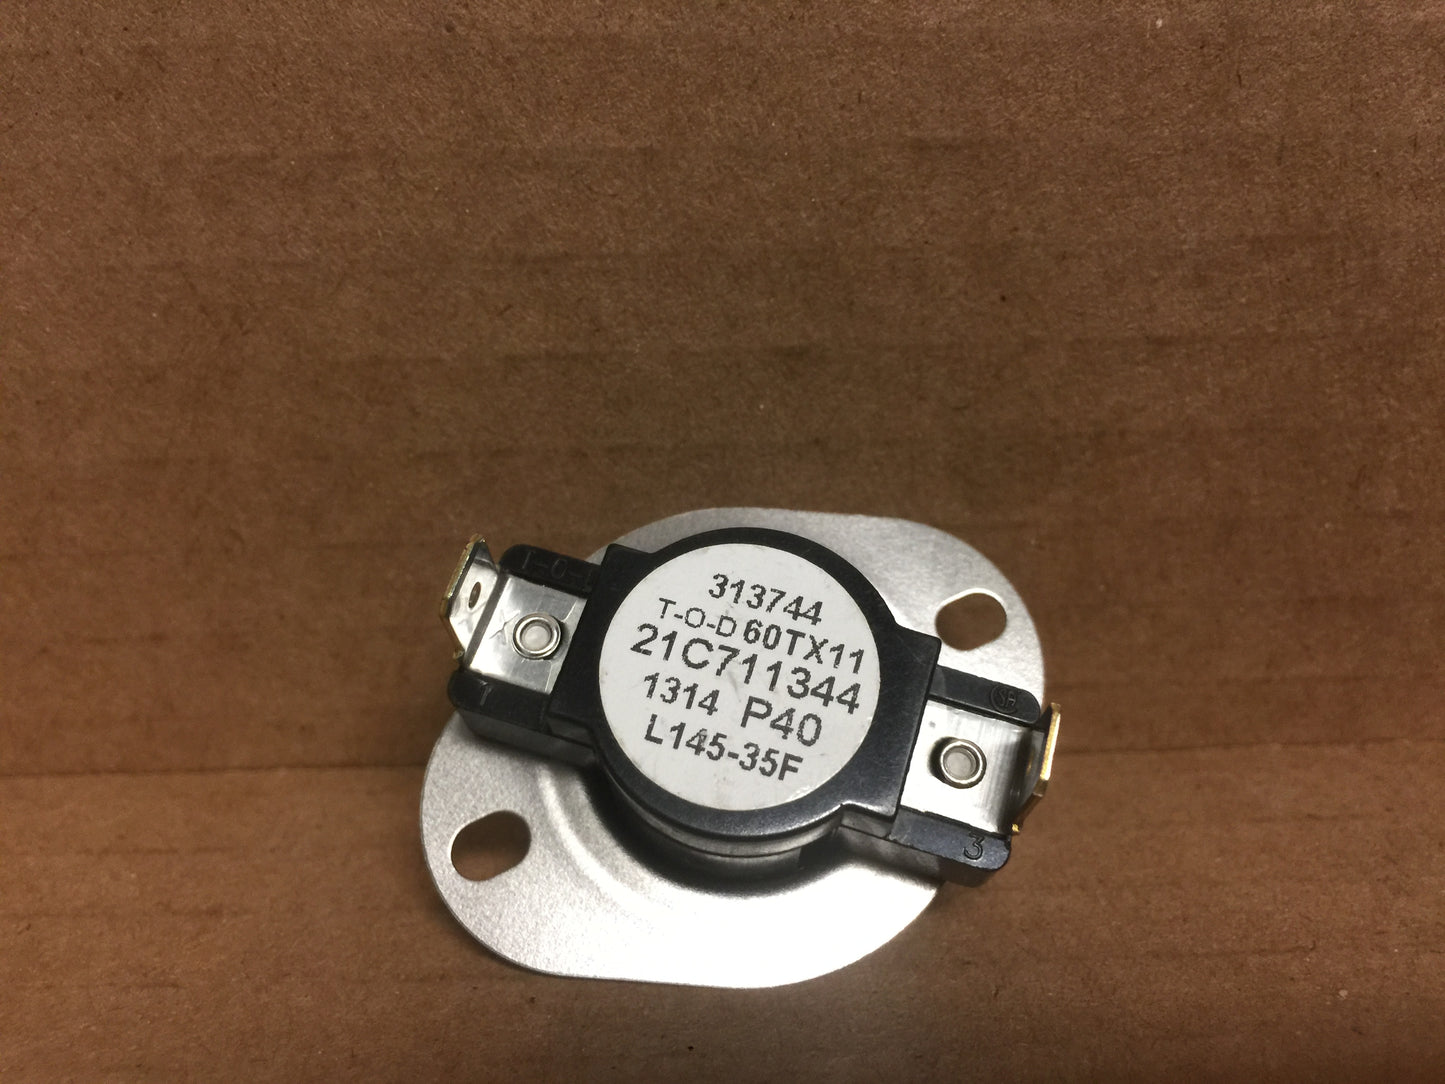 THERMOSTAT; CONTROL TEMPERATURE FOR AIR HANDLER, SPST, OPEN AT 145F, CLOSE AT 110F